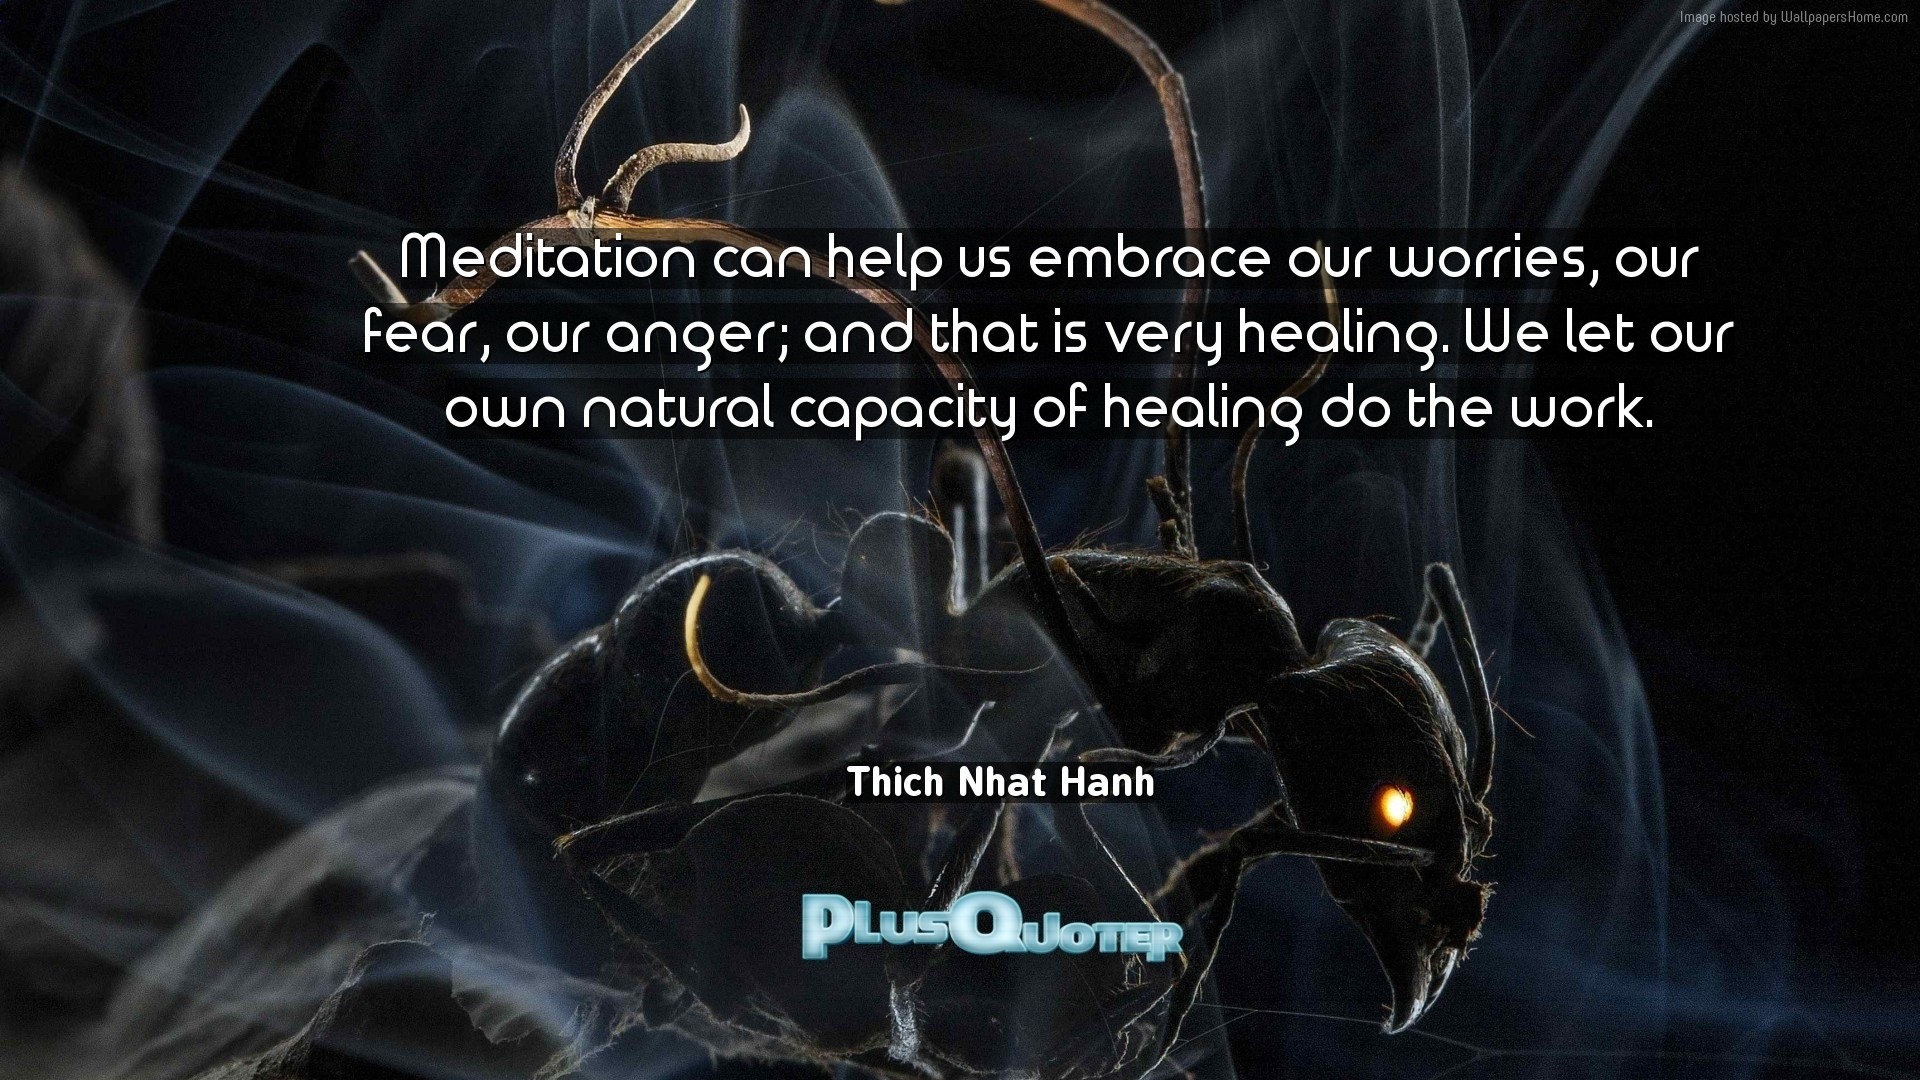 1920x1080 Download Wallpaper with inspirational Quotes- "Meditation can help us  embrace our worries, our. “